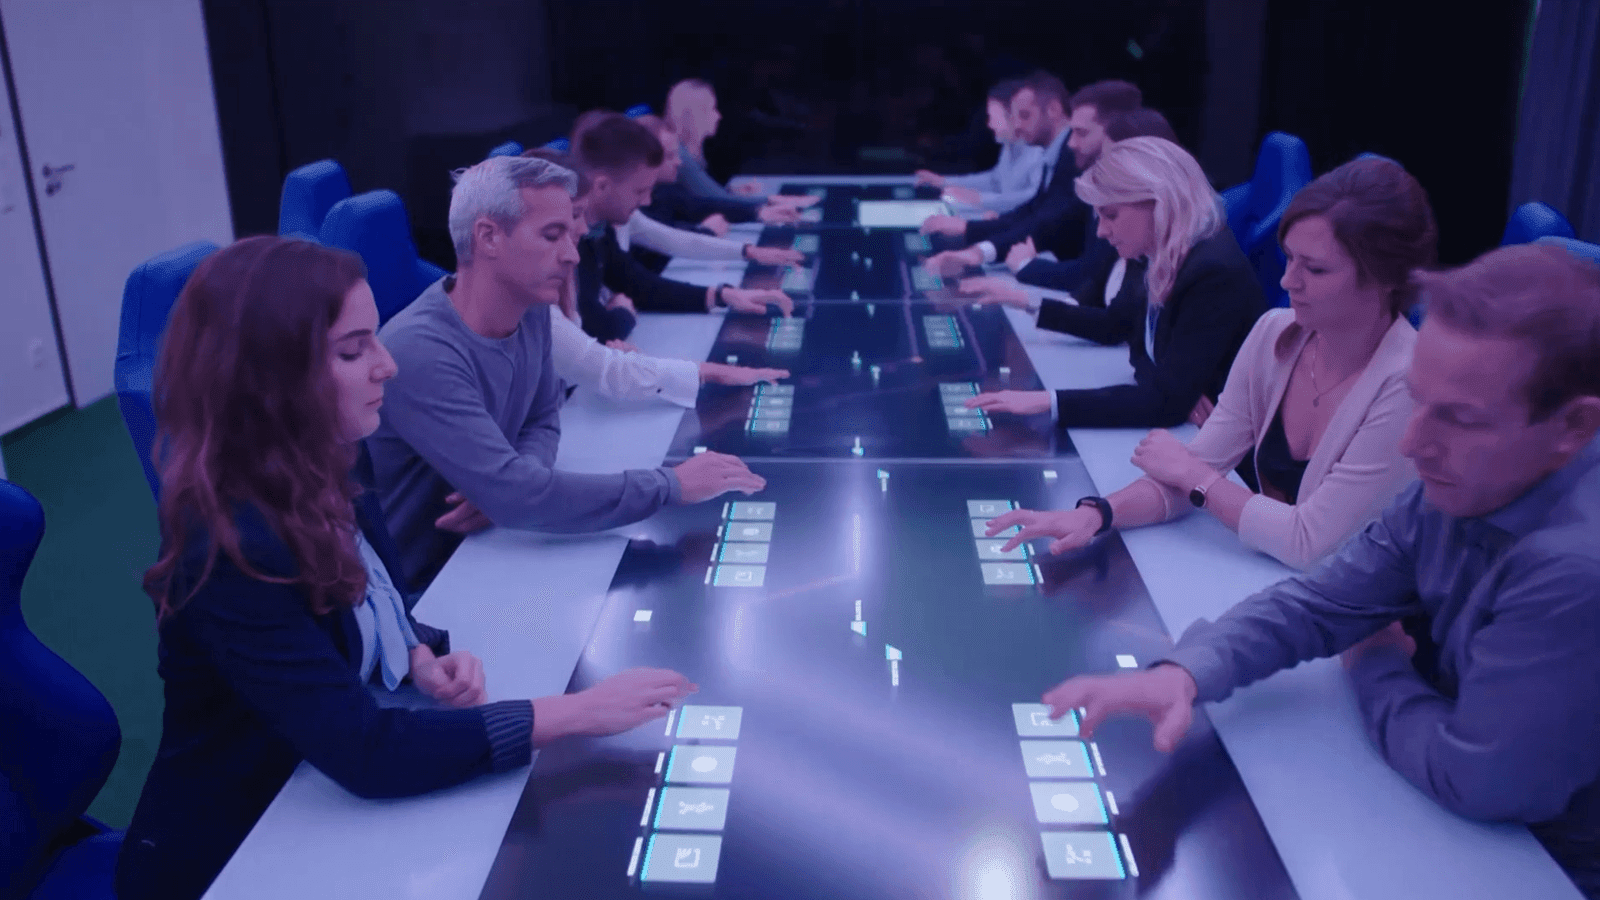 SKIN ULTRA multitouch table for collaboration in sports - Board room